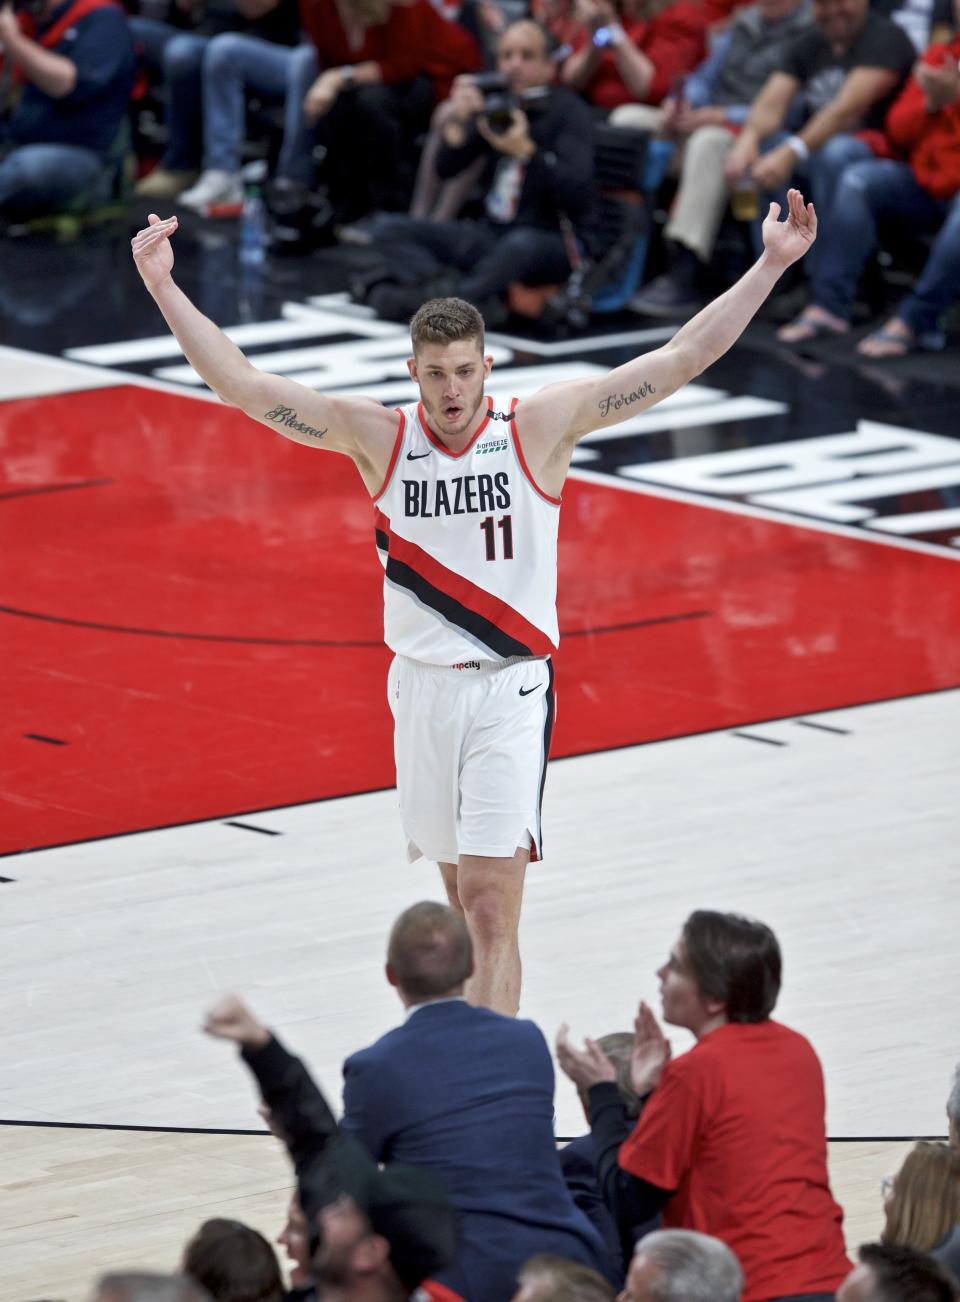 Portland Trail Blazers forward Meyers Leonard gestures to the crowd during the first half of Game 4 of the NBA basketball playoffs Western Conference finals against the Golden State Warriors, Monday, May 20, 2019, in Portland, Ore. (AP Photo/Craig Mitchelldyer)